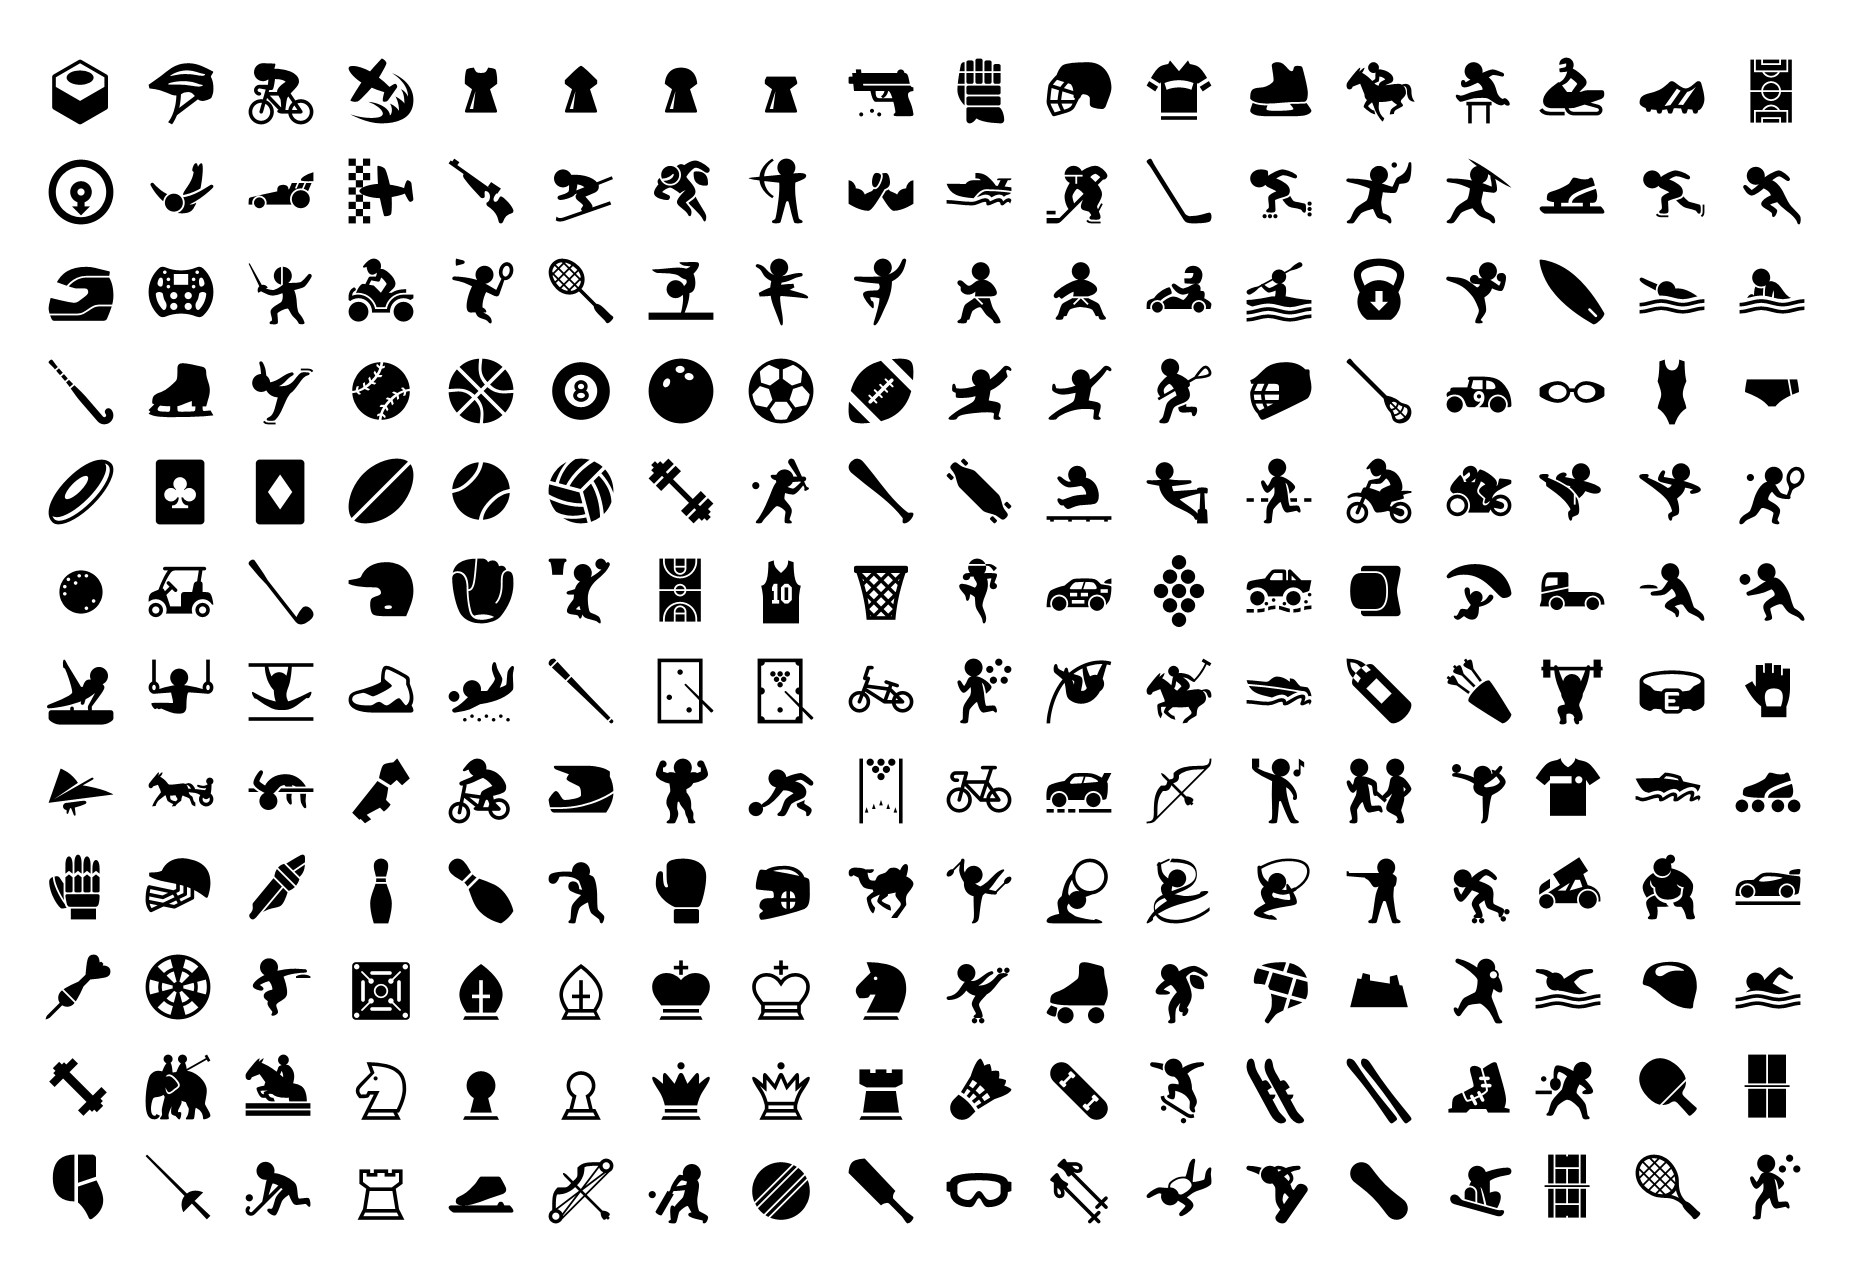 a-set-of-over-5800-filled-sport-icons